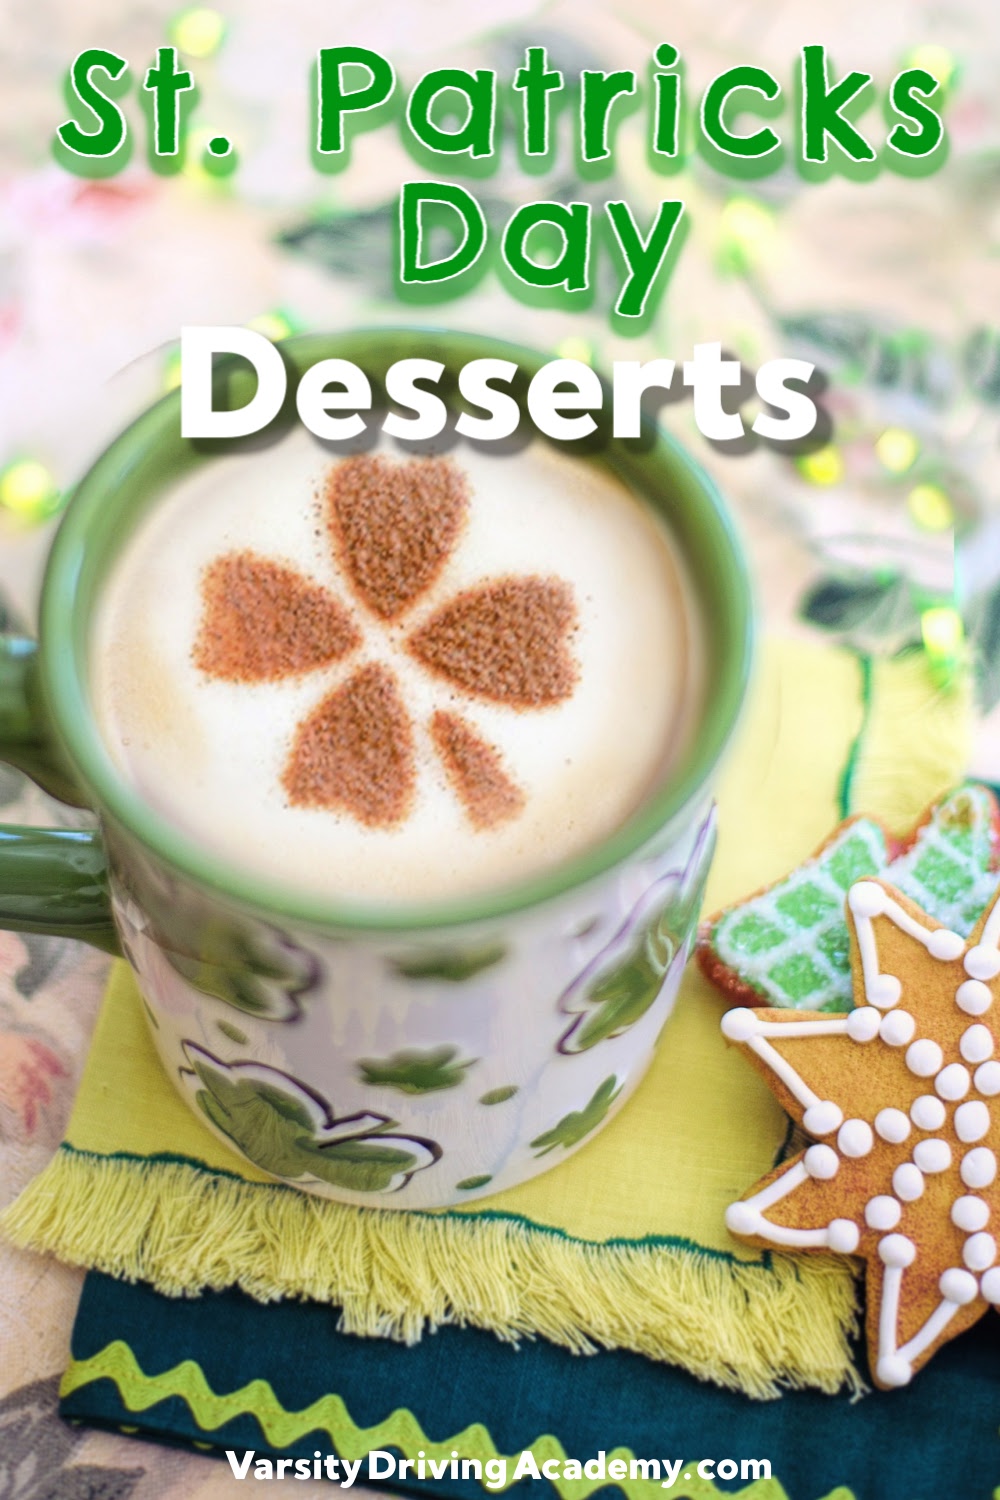 Use some of the best St Patricks Day dessert recipes to help you celebrate this Irish holiday and don't forget to share what you make with everyone.